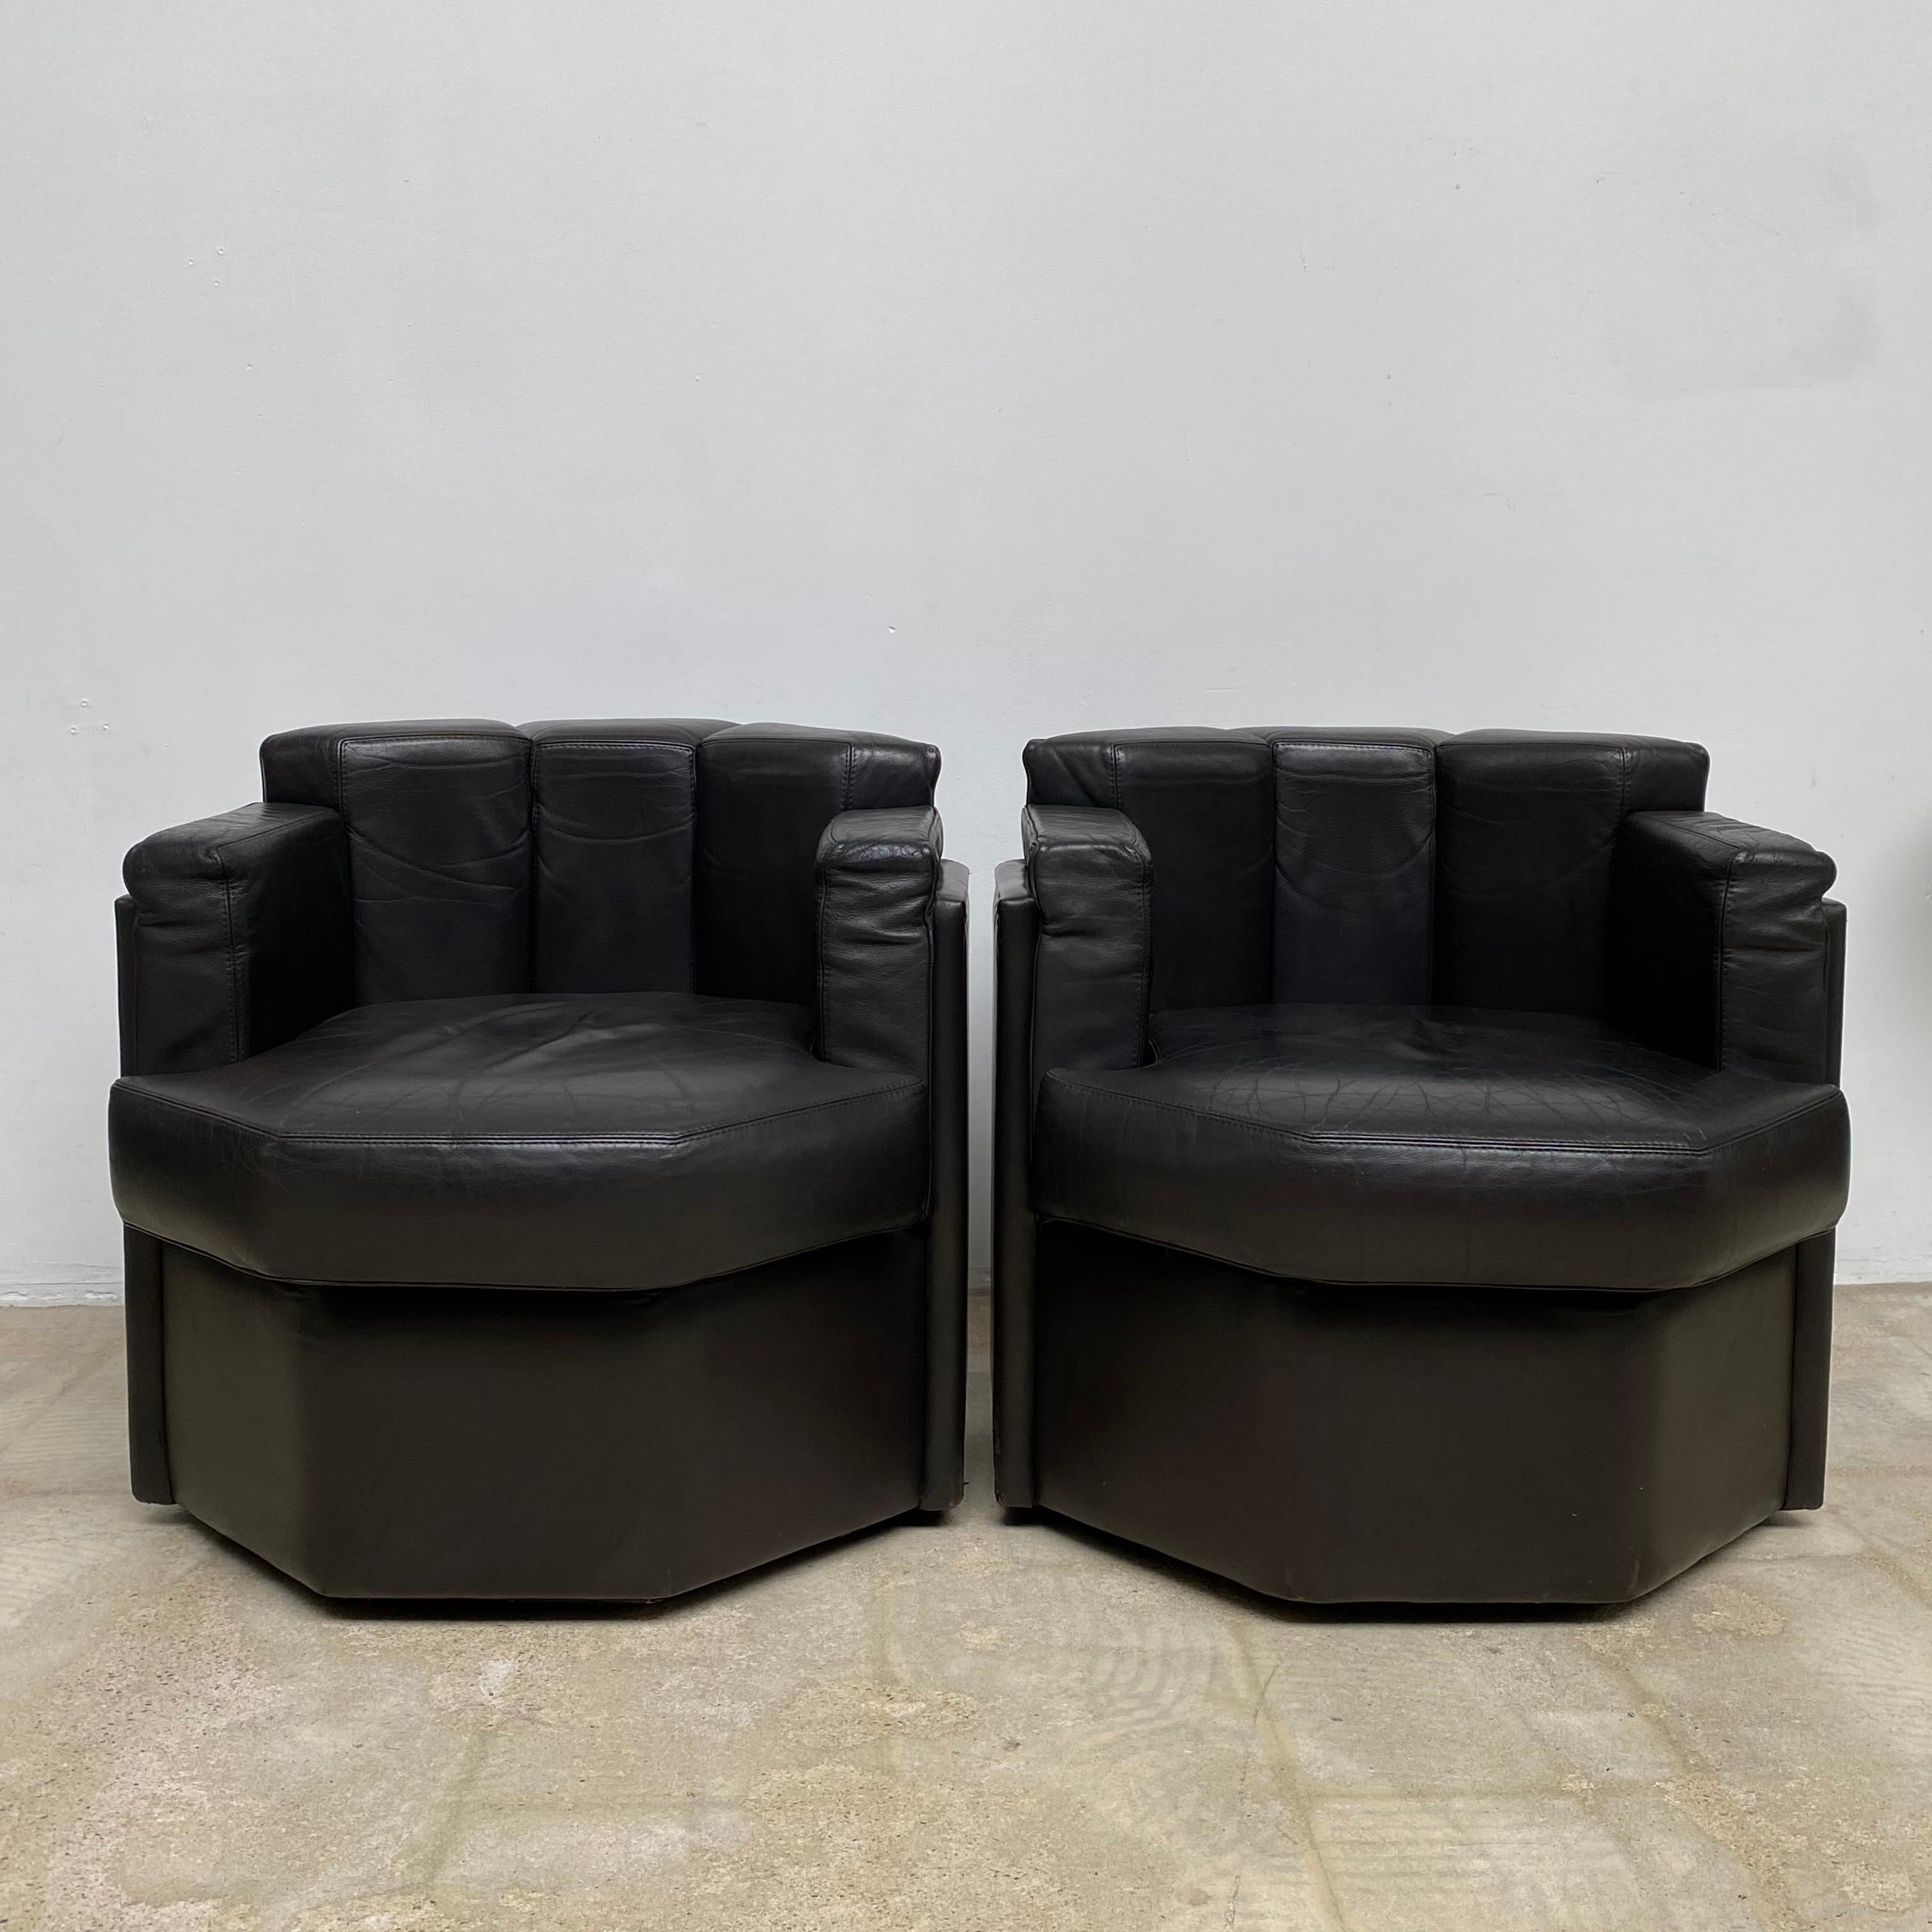 Set of dark brown octagonal club chairs, these uniquely shaped club chairs would very well suit an early 1970s James bond film set. The original segmented way of reupholstery makes these club chair both rare and unique in style and very comfortable